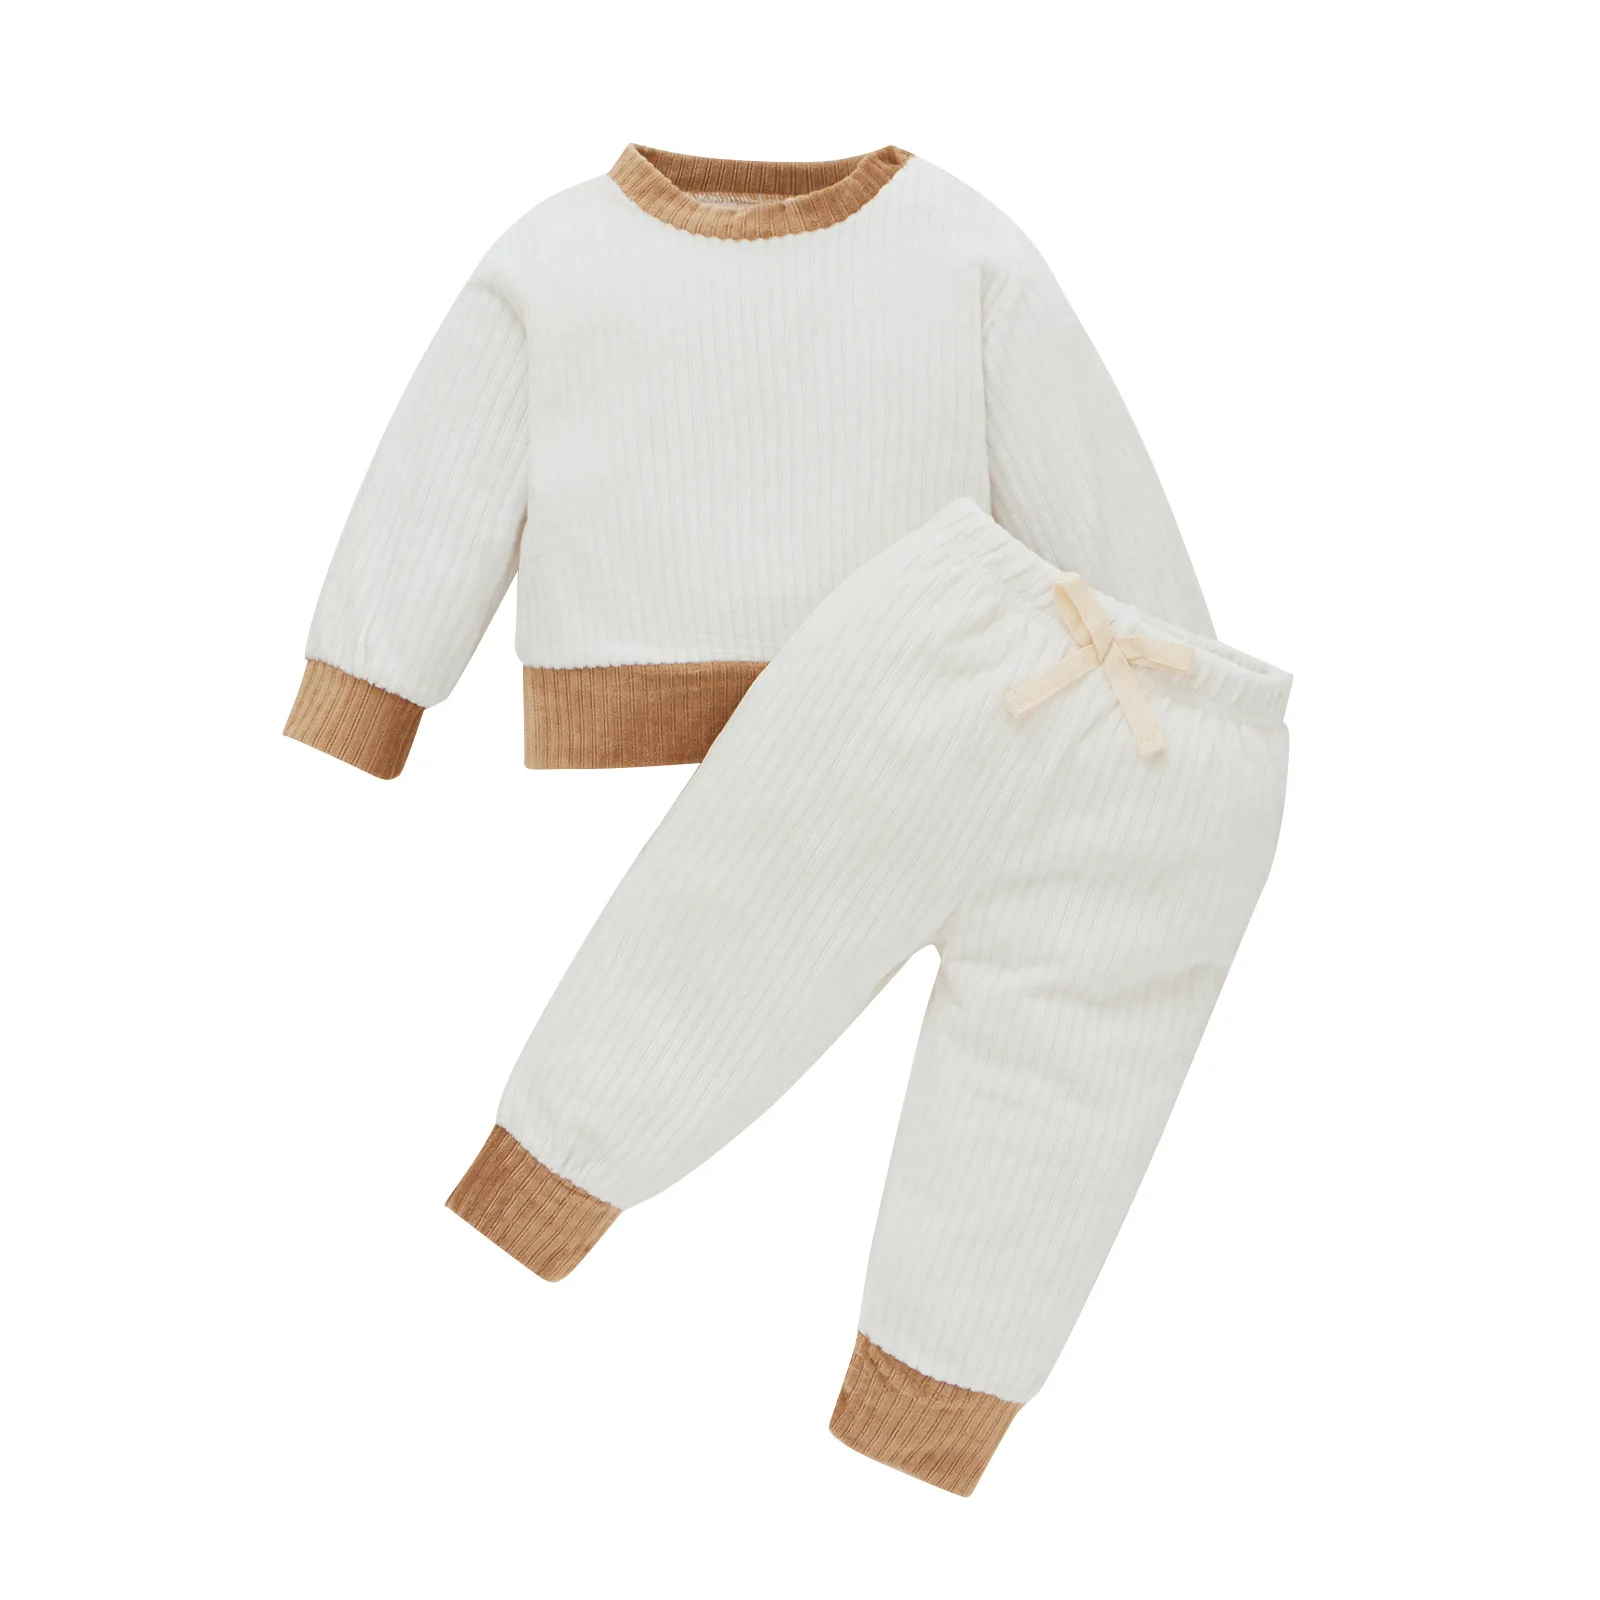 New arrival infant toddler girls clothing sets long sleeve sweatshirt+pants two piece boys girls clothing sets